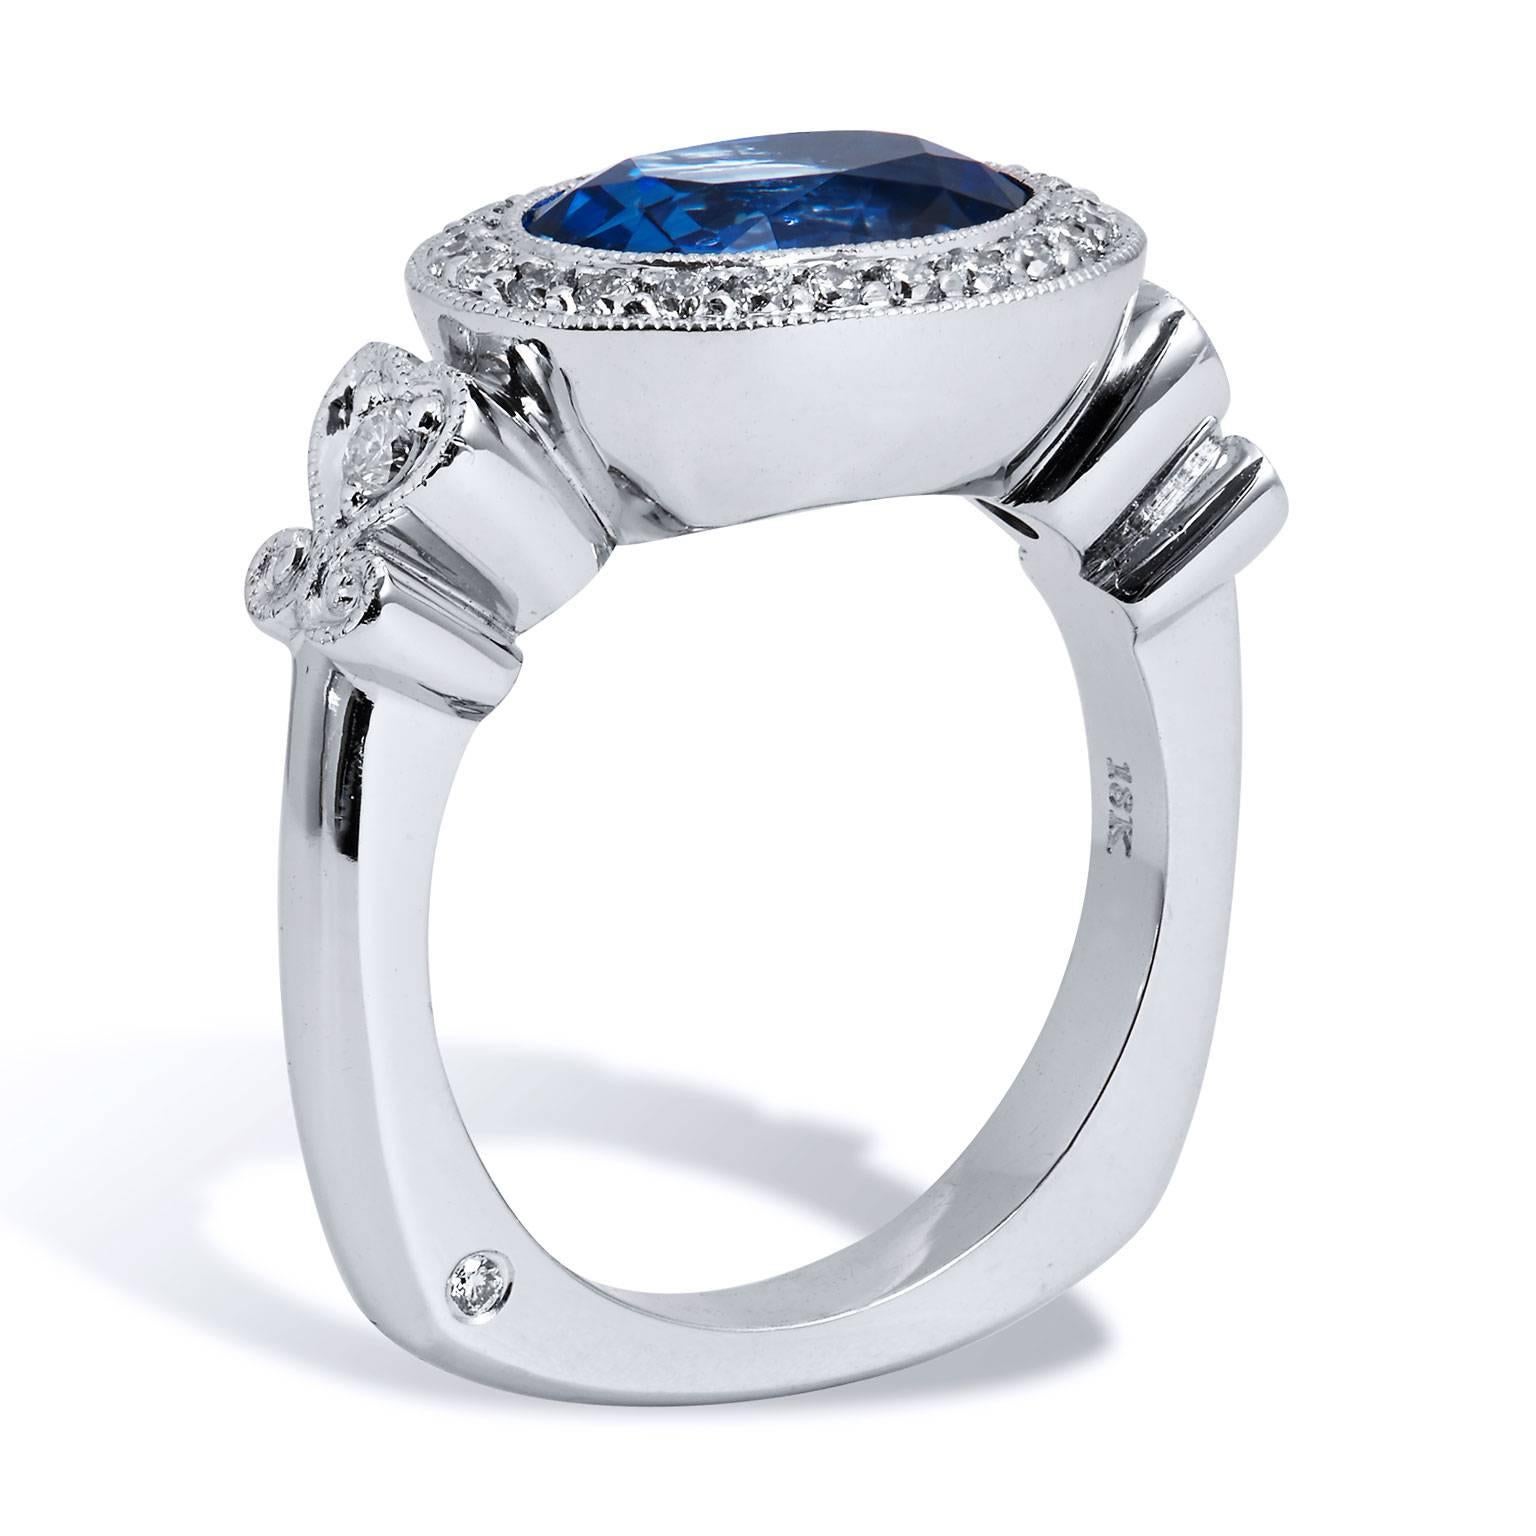 H & H 4.18 Carat Oval Sapphire and Diamond Pave Ring

This is a stunning handmade, one of a kind blue sapphire and diamond ring.  
It is made of 18 karat white gold and palladium. 

The blue sapphire center is a 4.18 carat oval cut sapphire ( GIA#